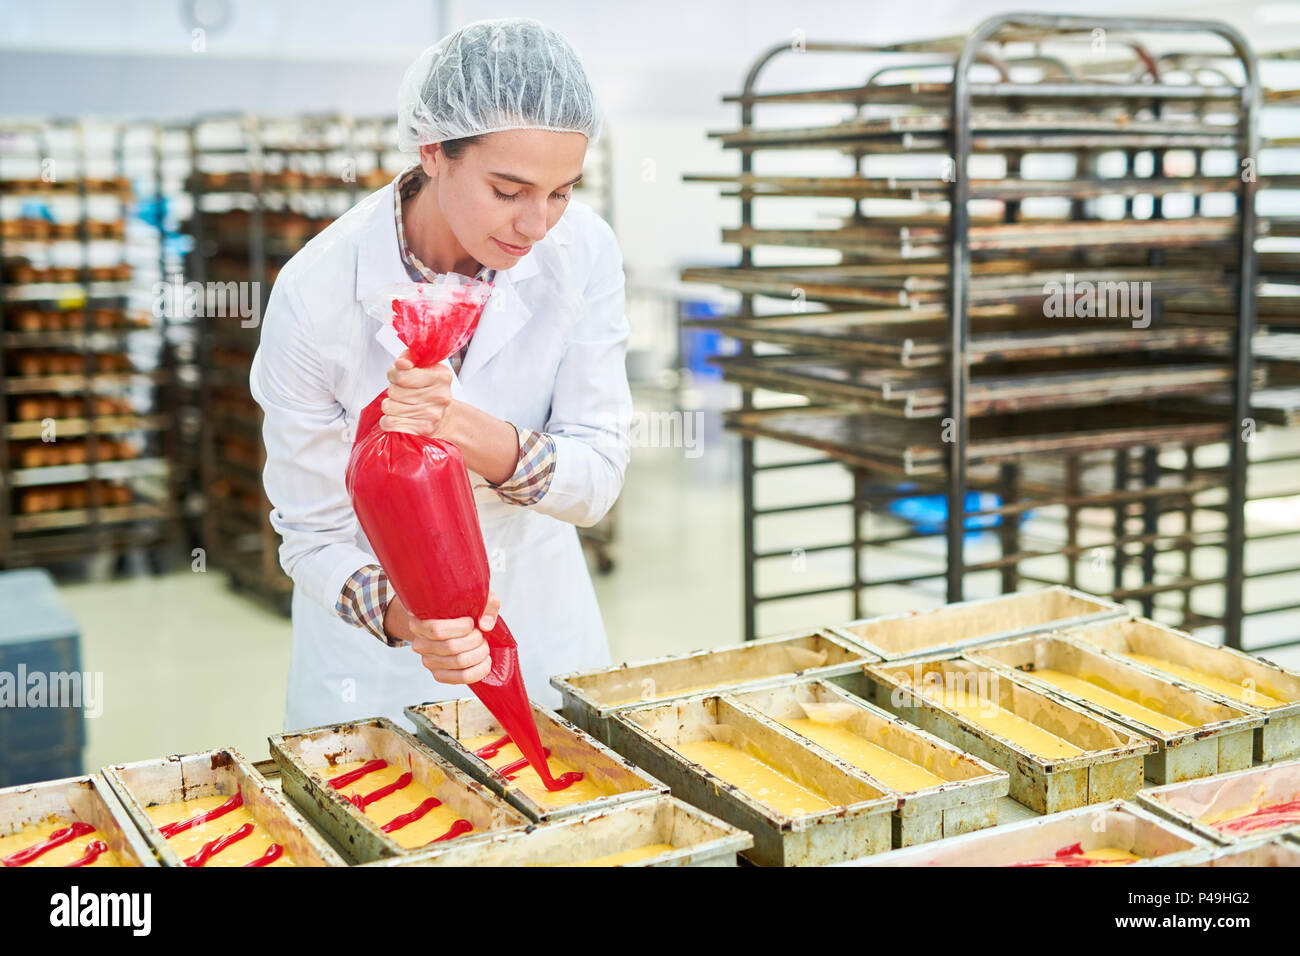 Confectionery factory employee using pastry bag Stock Photo